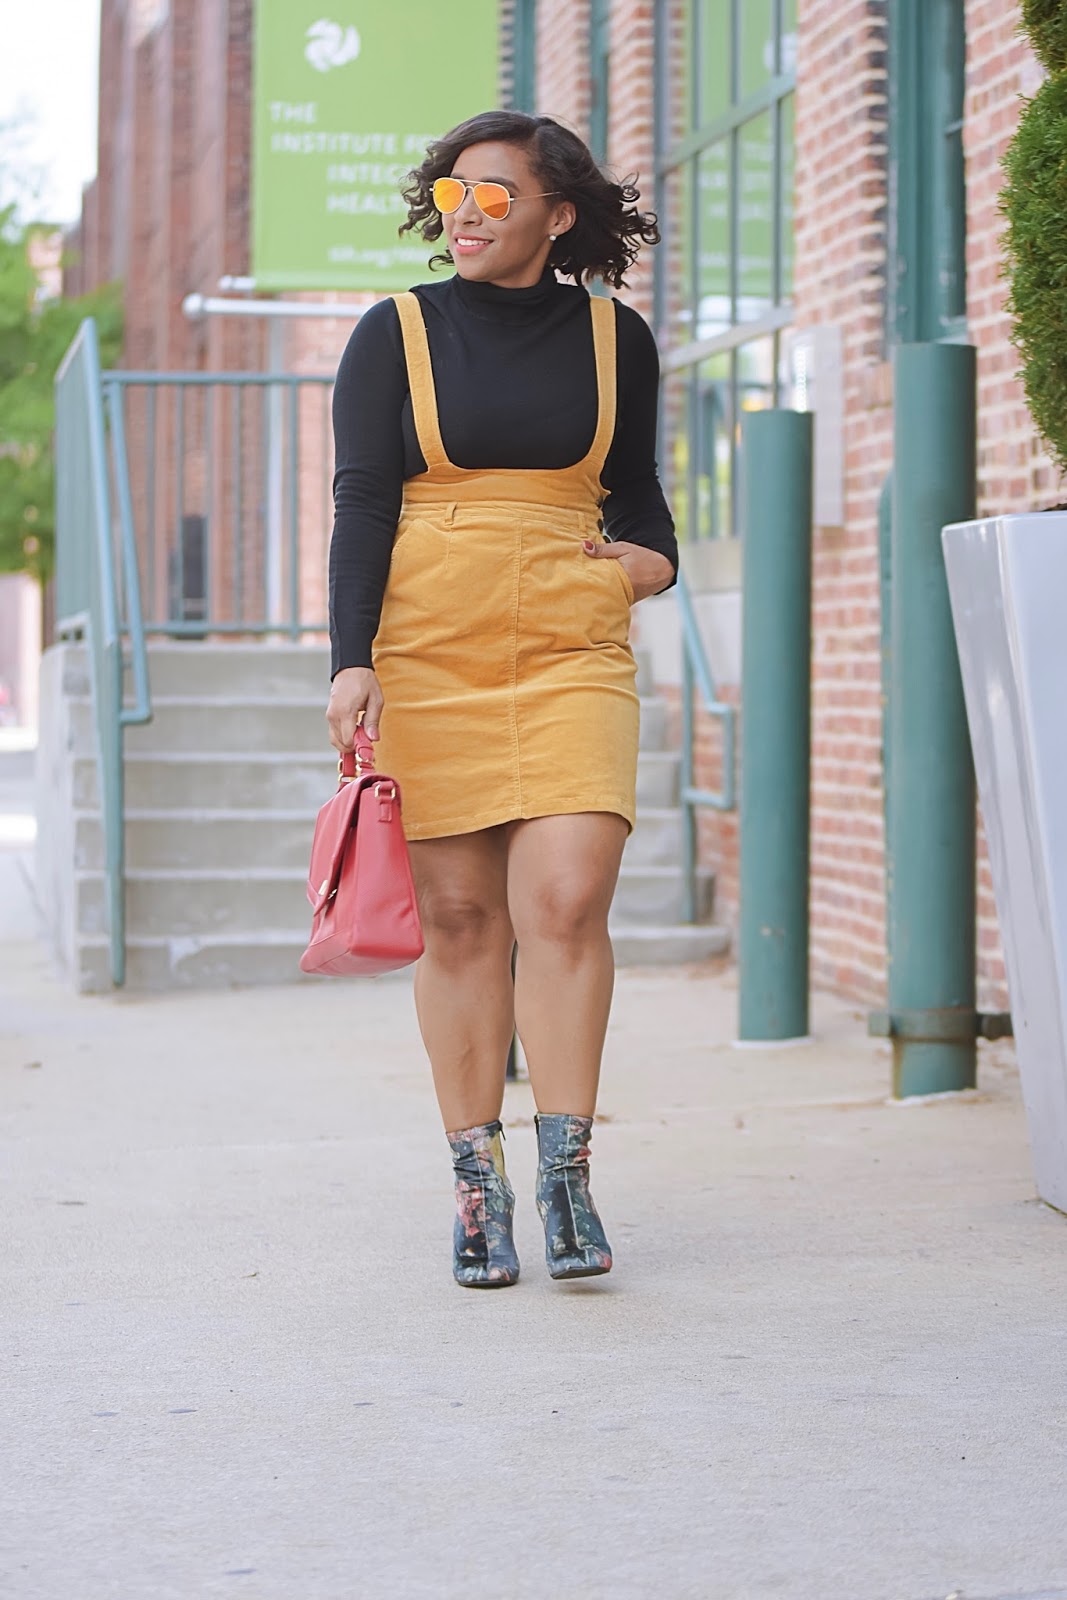 modcloth, modcloth squad, fall outfit ideas, floral booties, sock booties, dcbloggers, jumpsuit